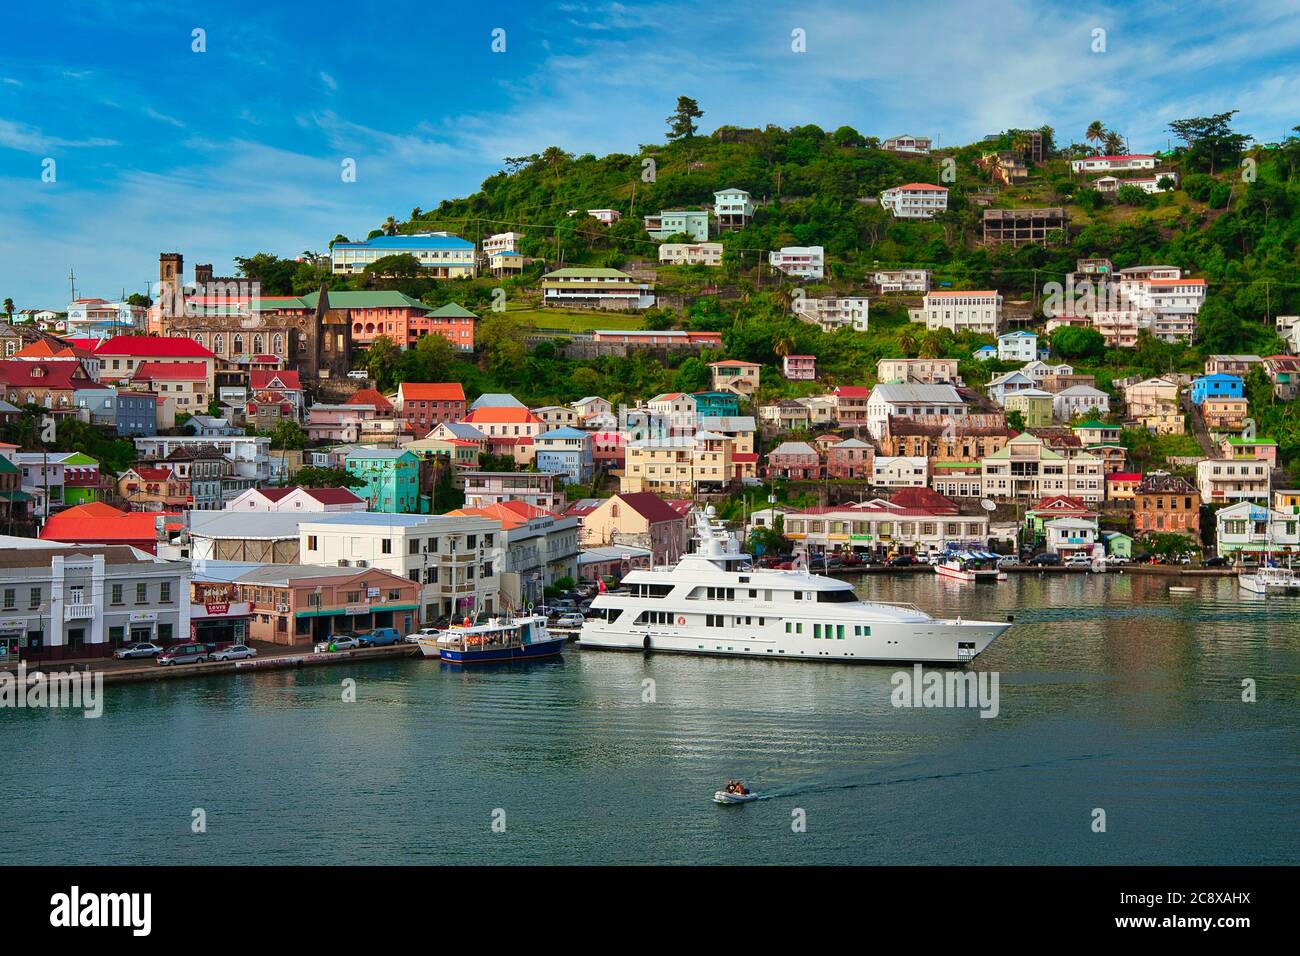 Overlooking the harbour and waterfront of St George's with small boats moored and houses on the hillsides beyond, Grenada island, The Caribbean Stock Photo